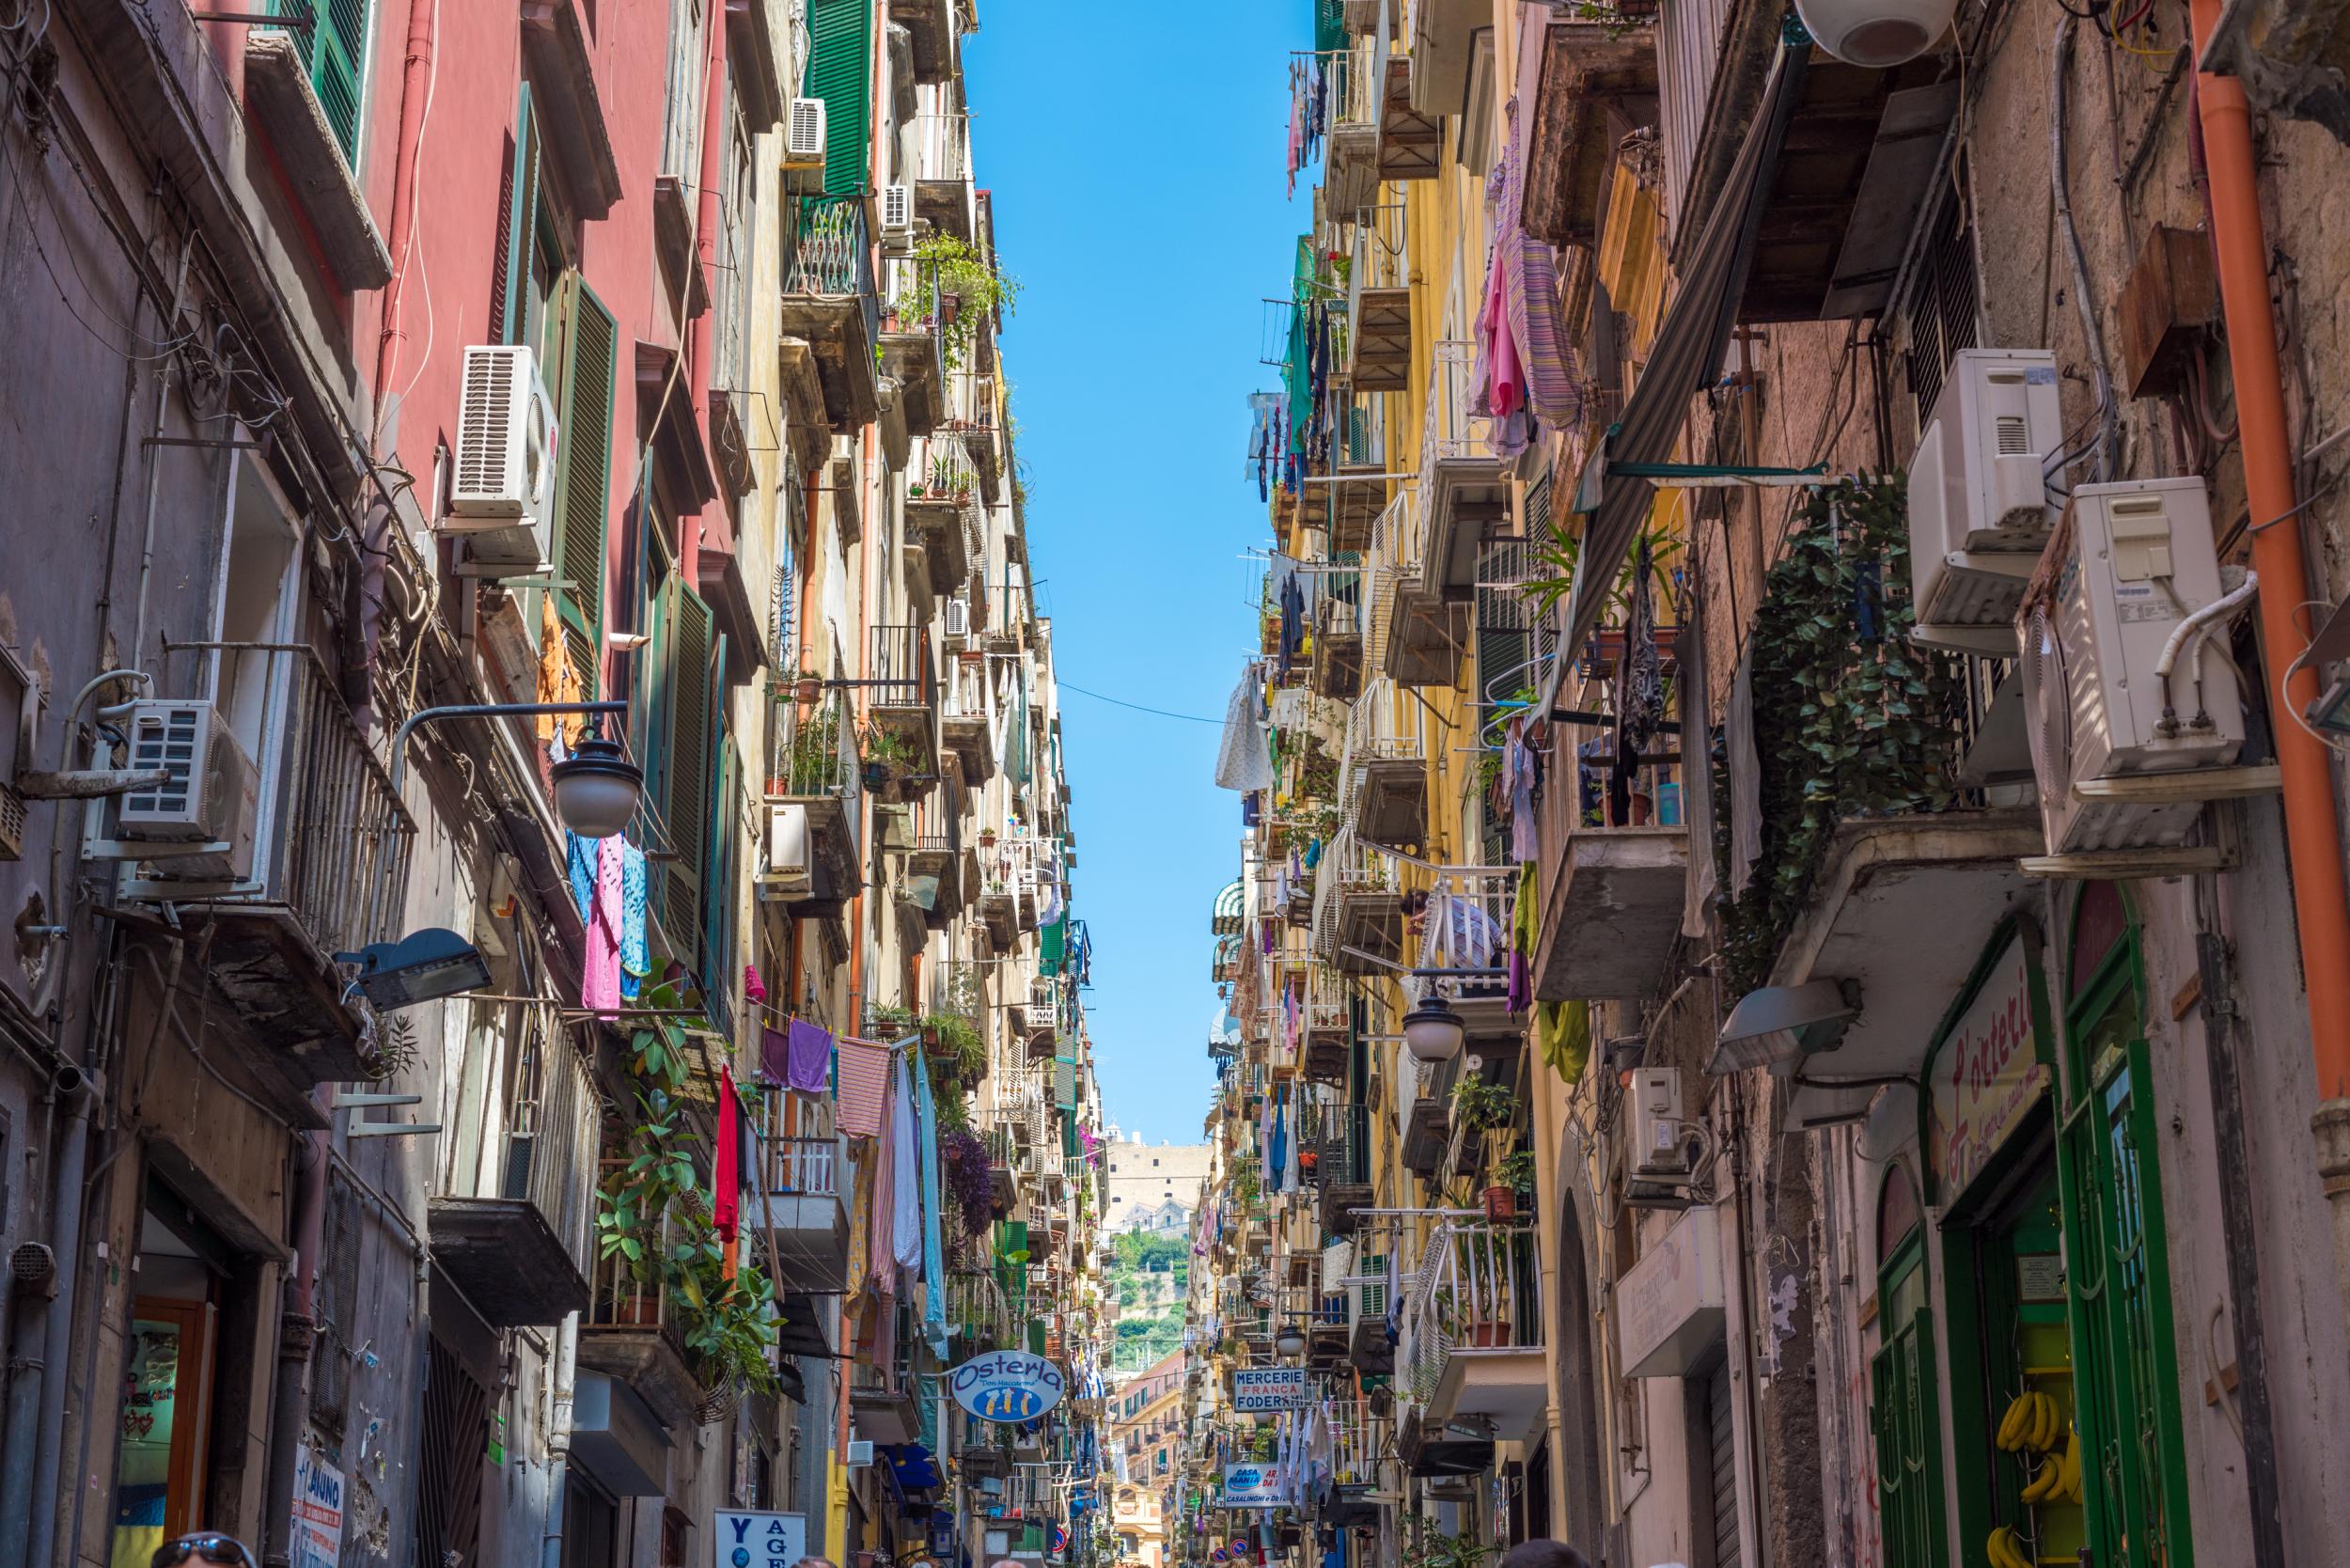 The colourful streets of Naples’ old town